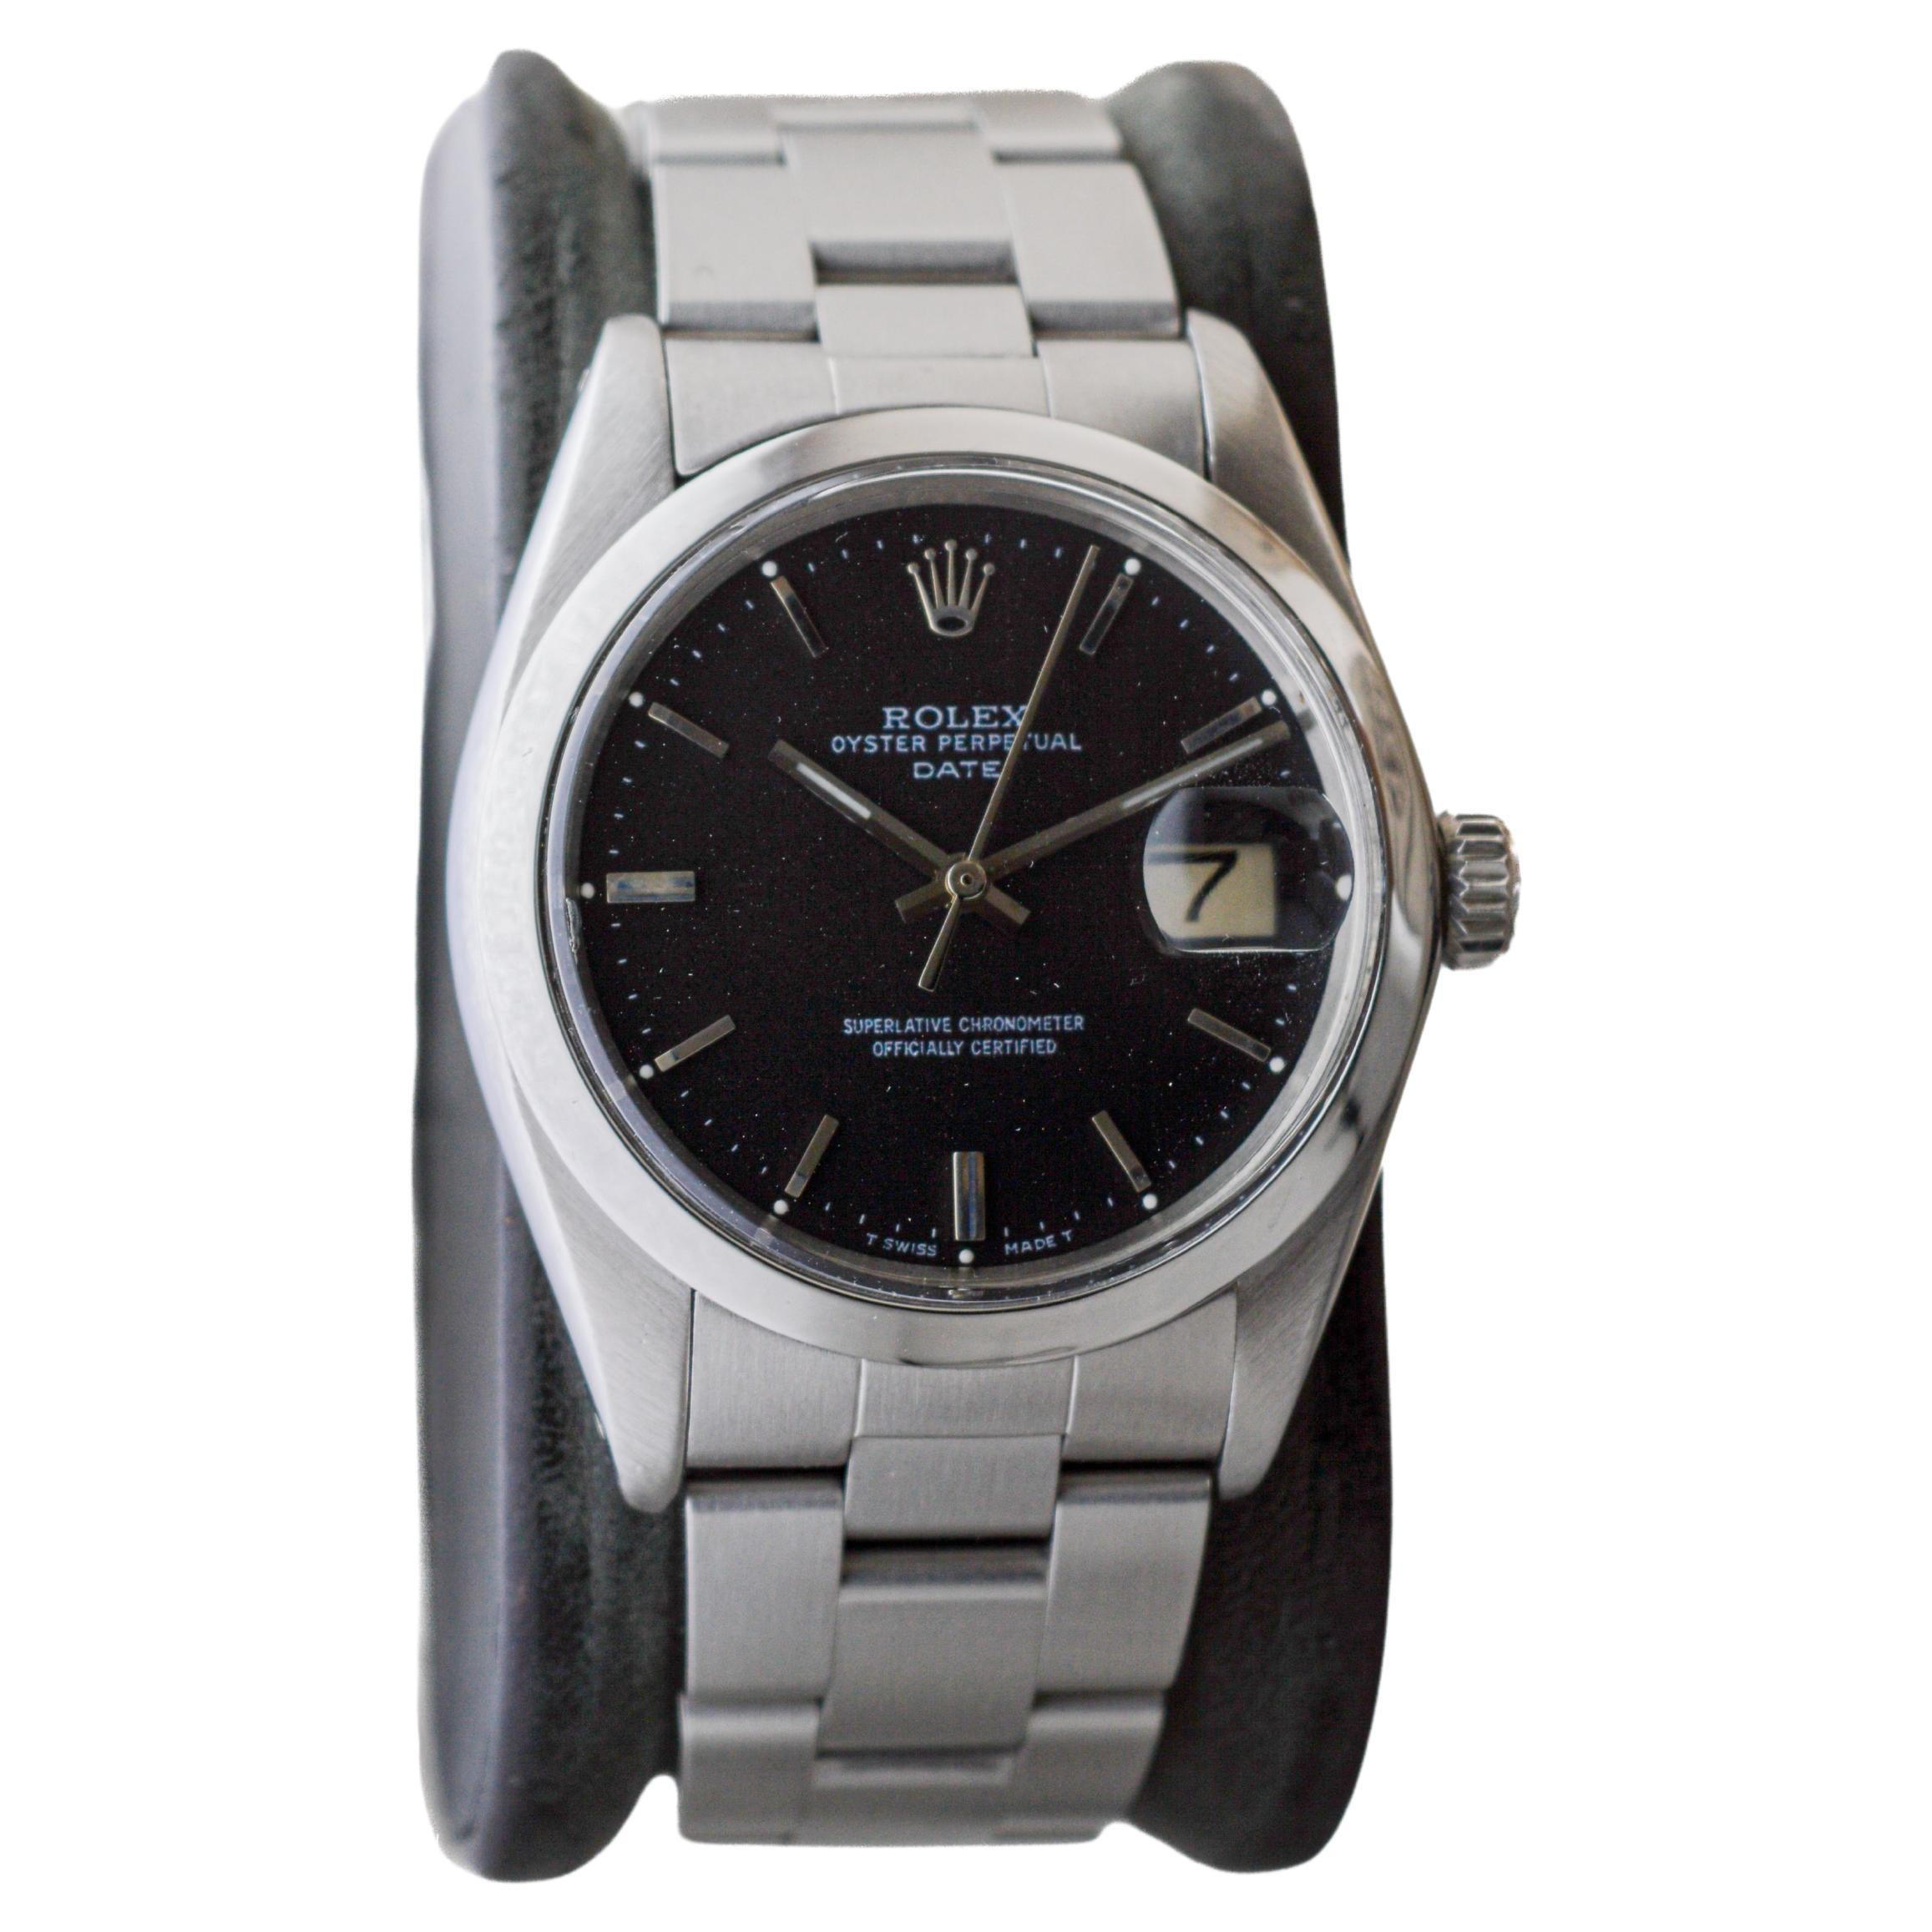 FACTORY / HOUSE: Rolex Watch Company
STYLE / REFERENCE: Oyster Perpetual Date / Reference 1500
METAL / MATERIAL: Stainless Steel
CIRCA / YEAR: 1970's
DIMENSIONS / SIZE: Length 43mm X Diameter 35mm
MOVEMENT / CALIBER: Perpetual Winding / 26 Jewels /